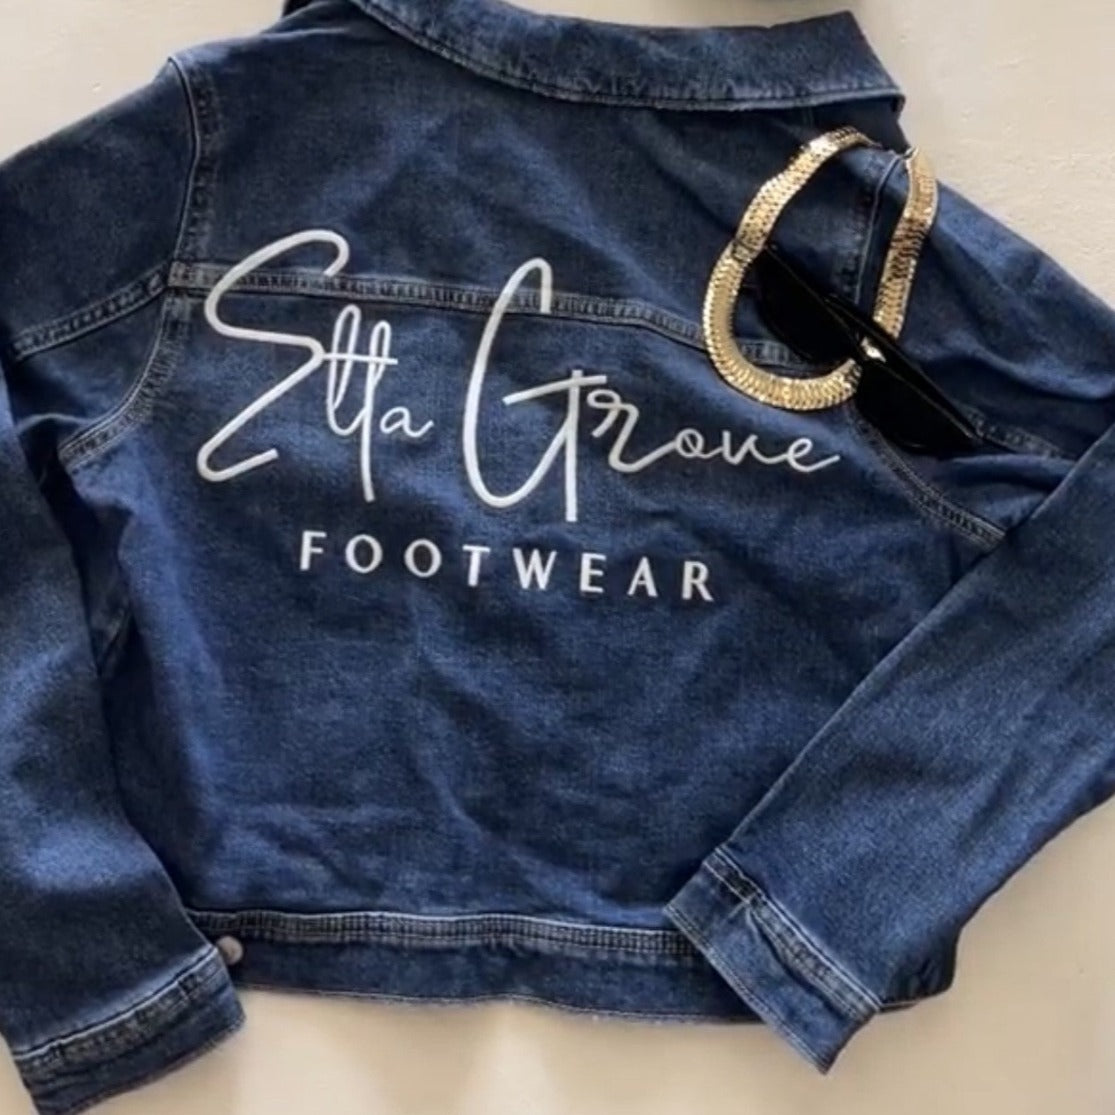 Denim jacket with embroidered logo